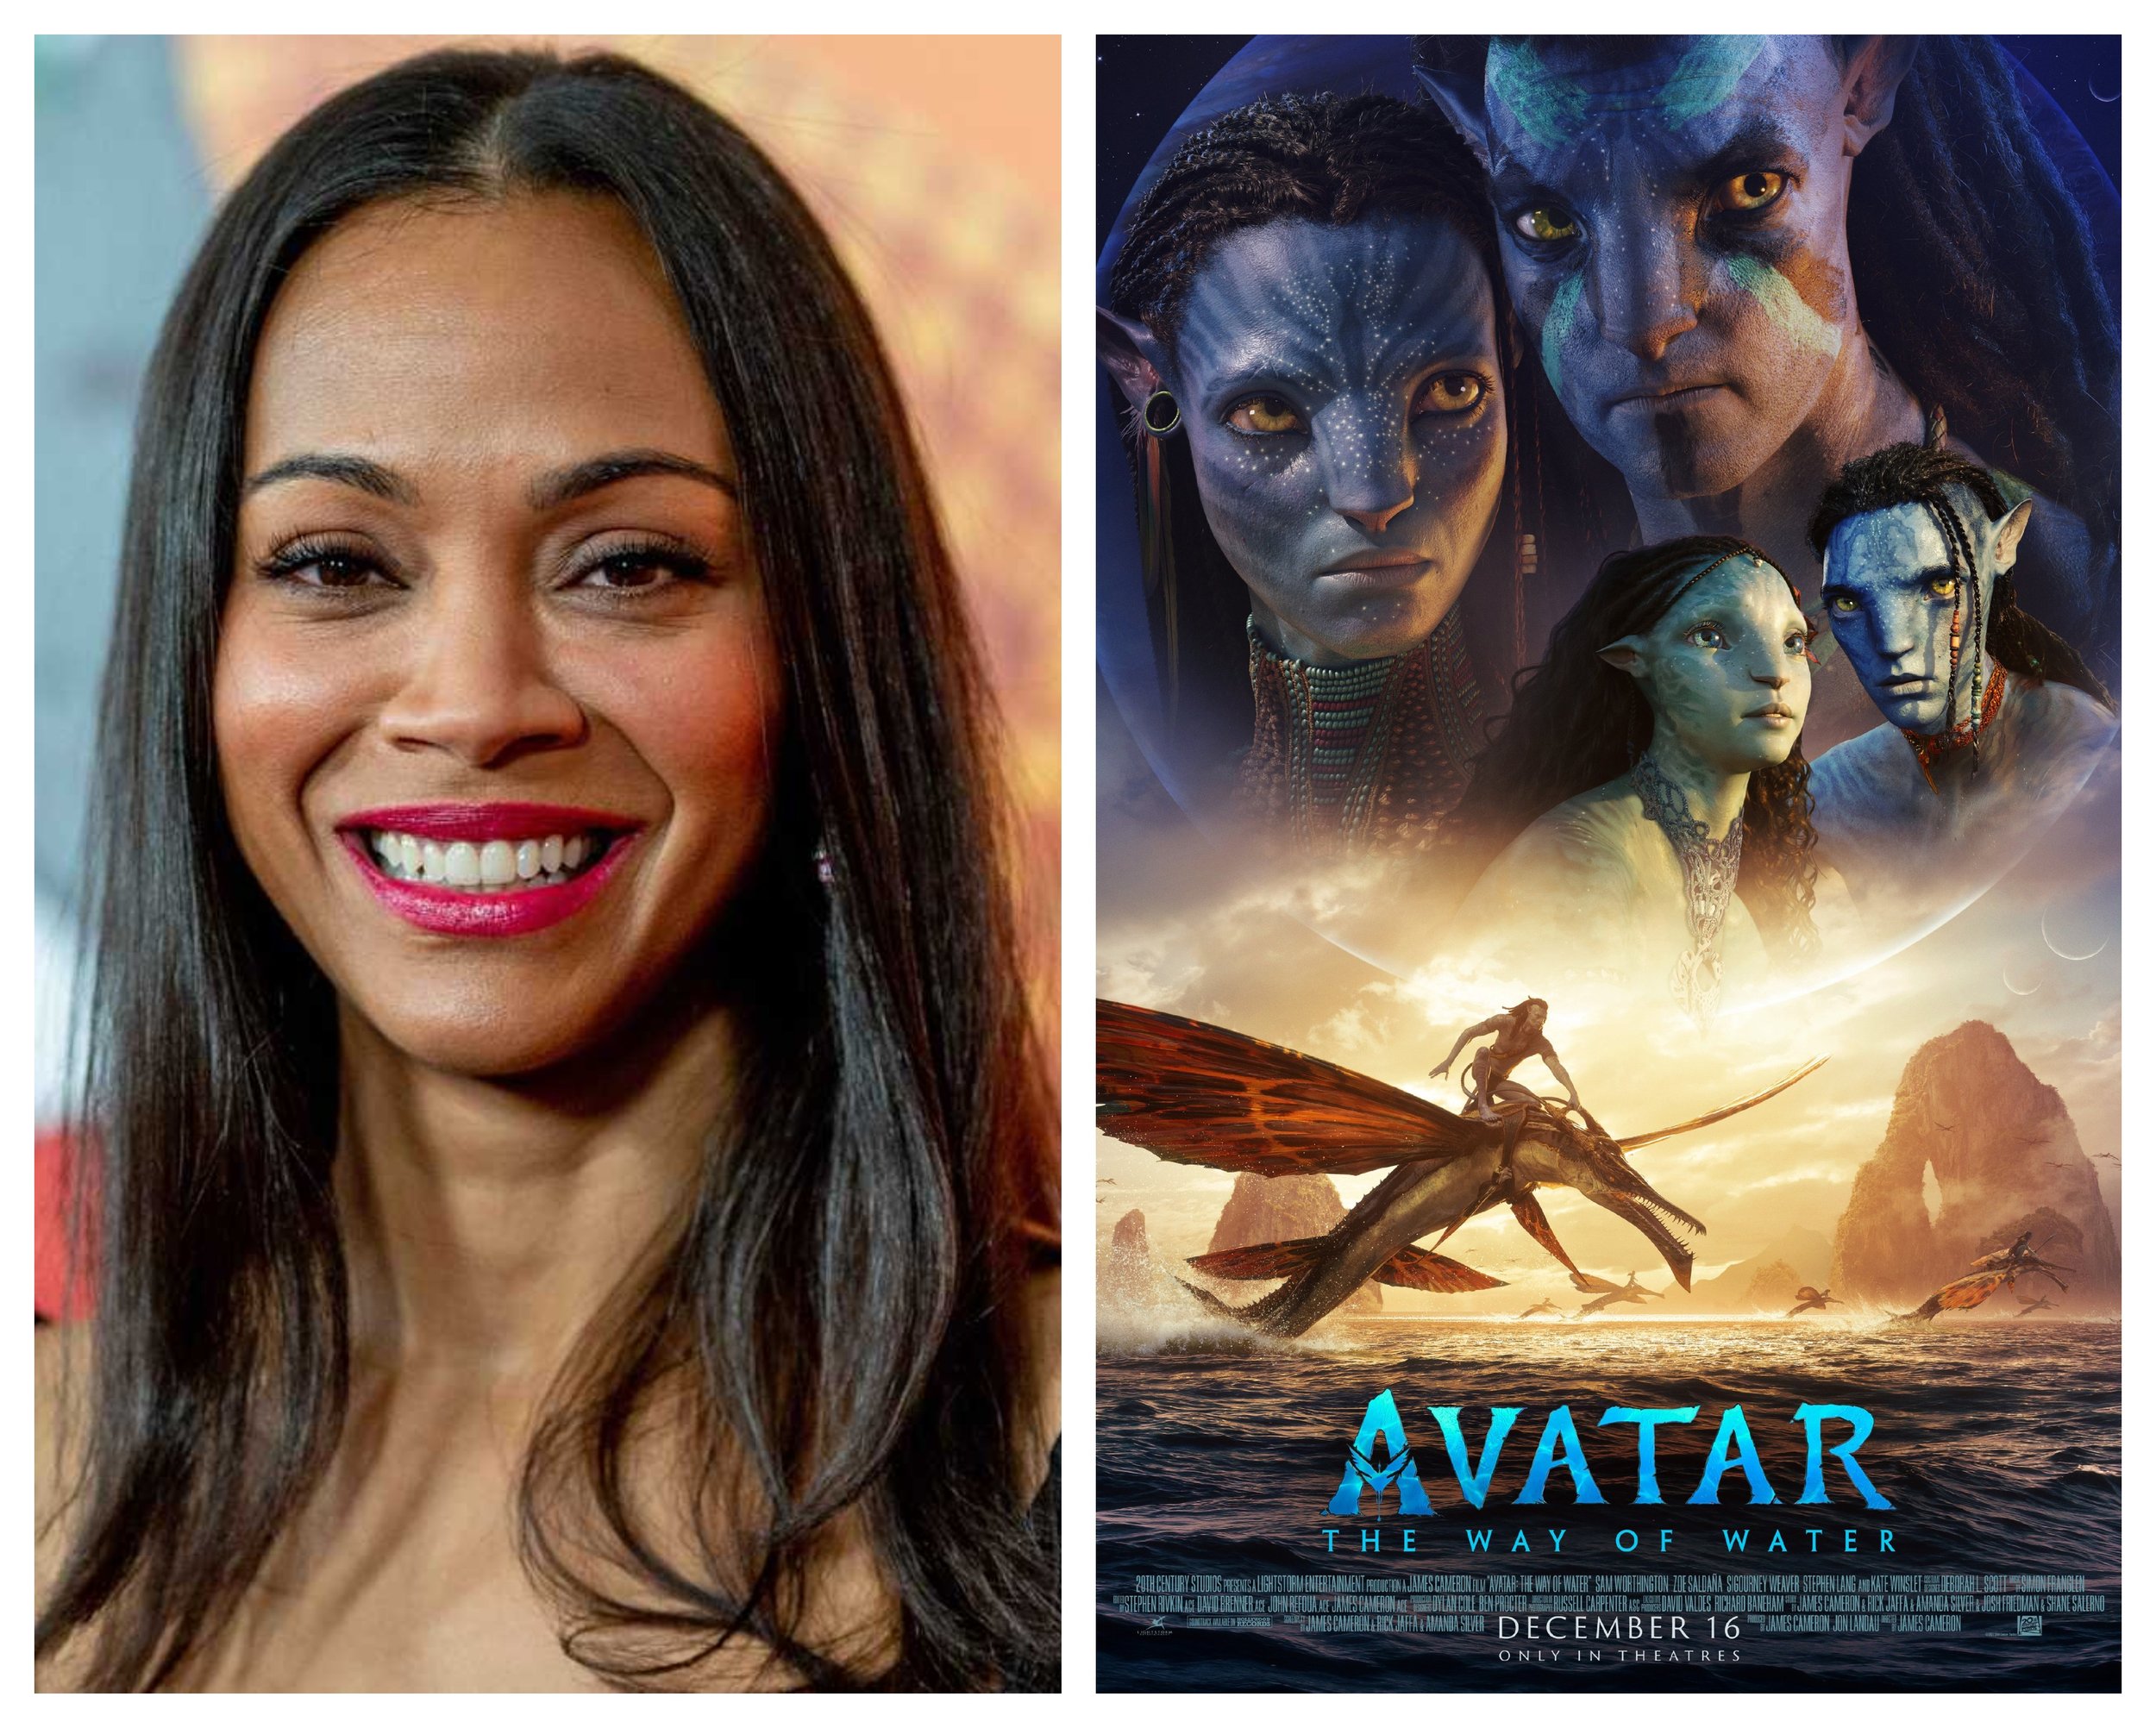 Zoe Saldana attends the new Avatar premiere and more star snaps  Page Six